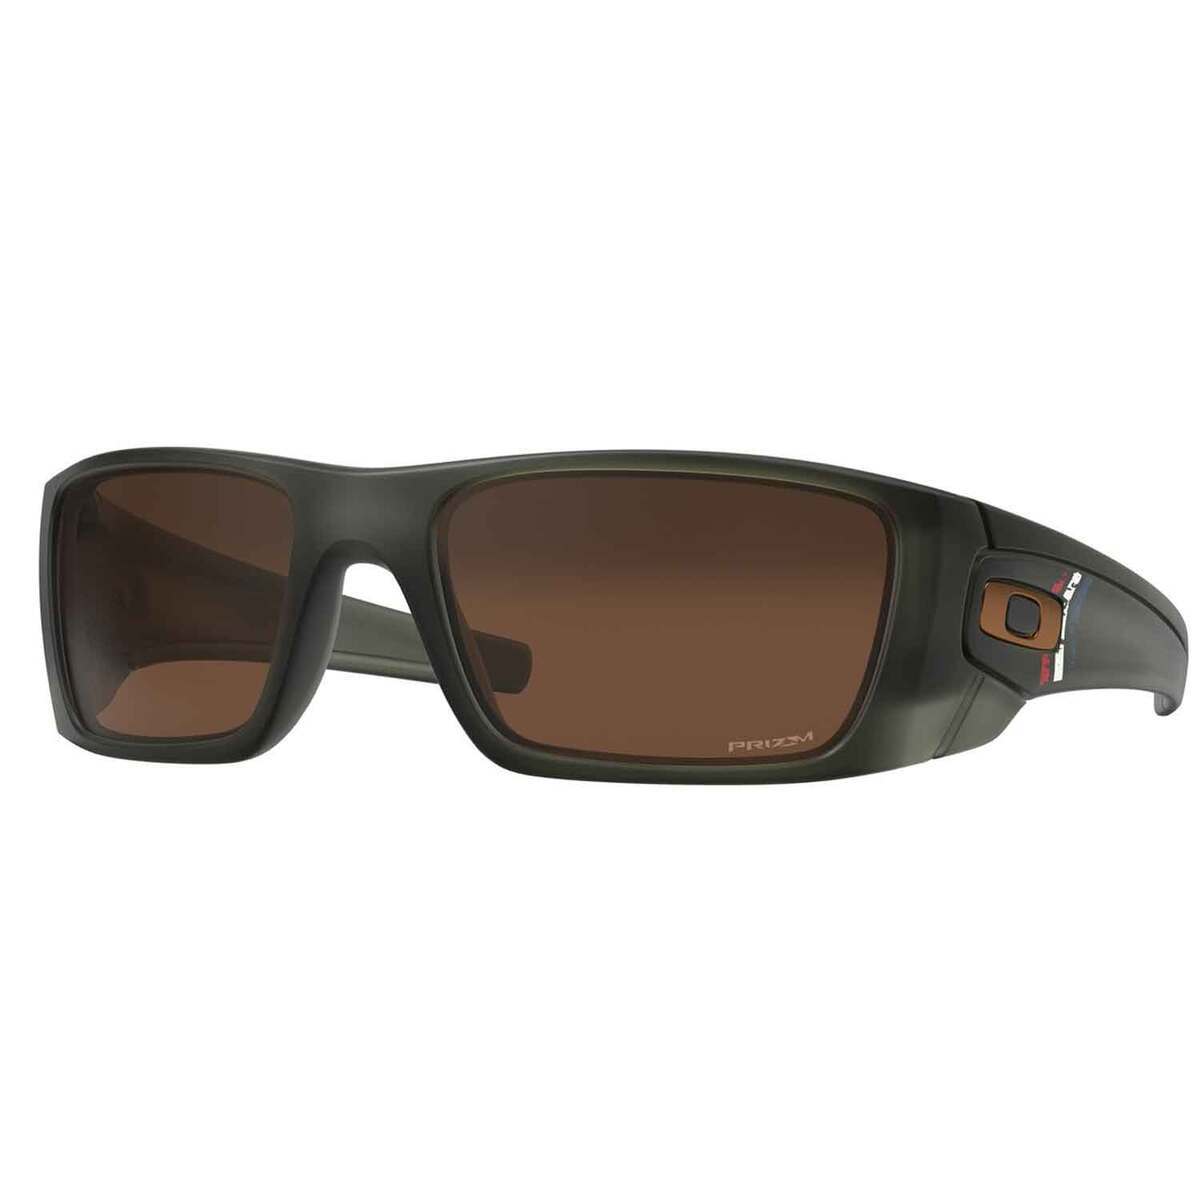 Military Sunglasses  Official Oakley Standard Issue US